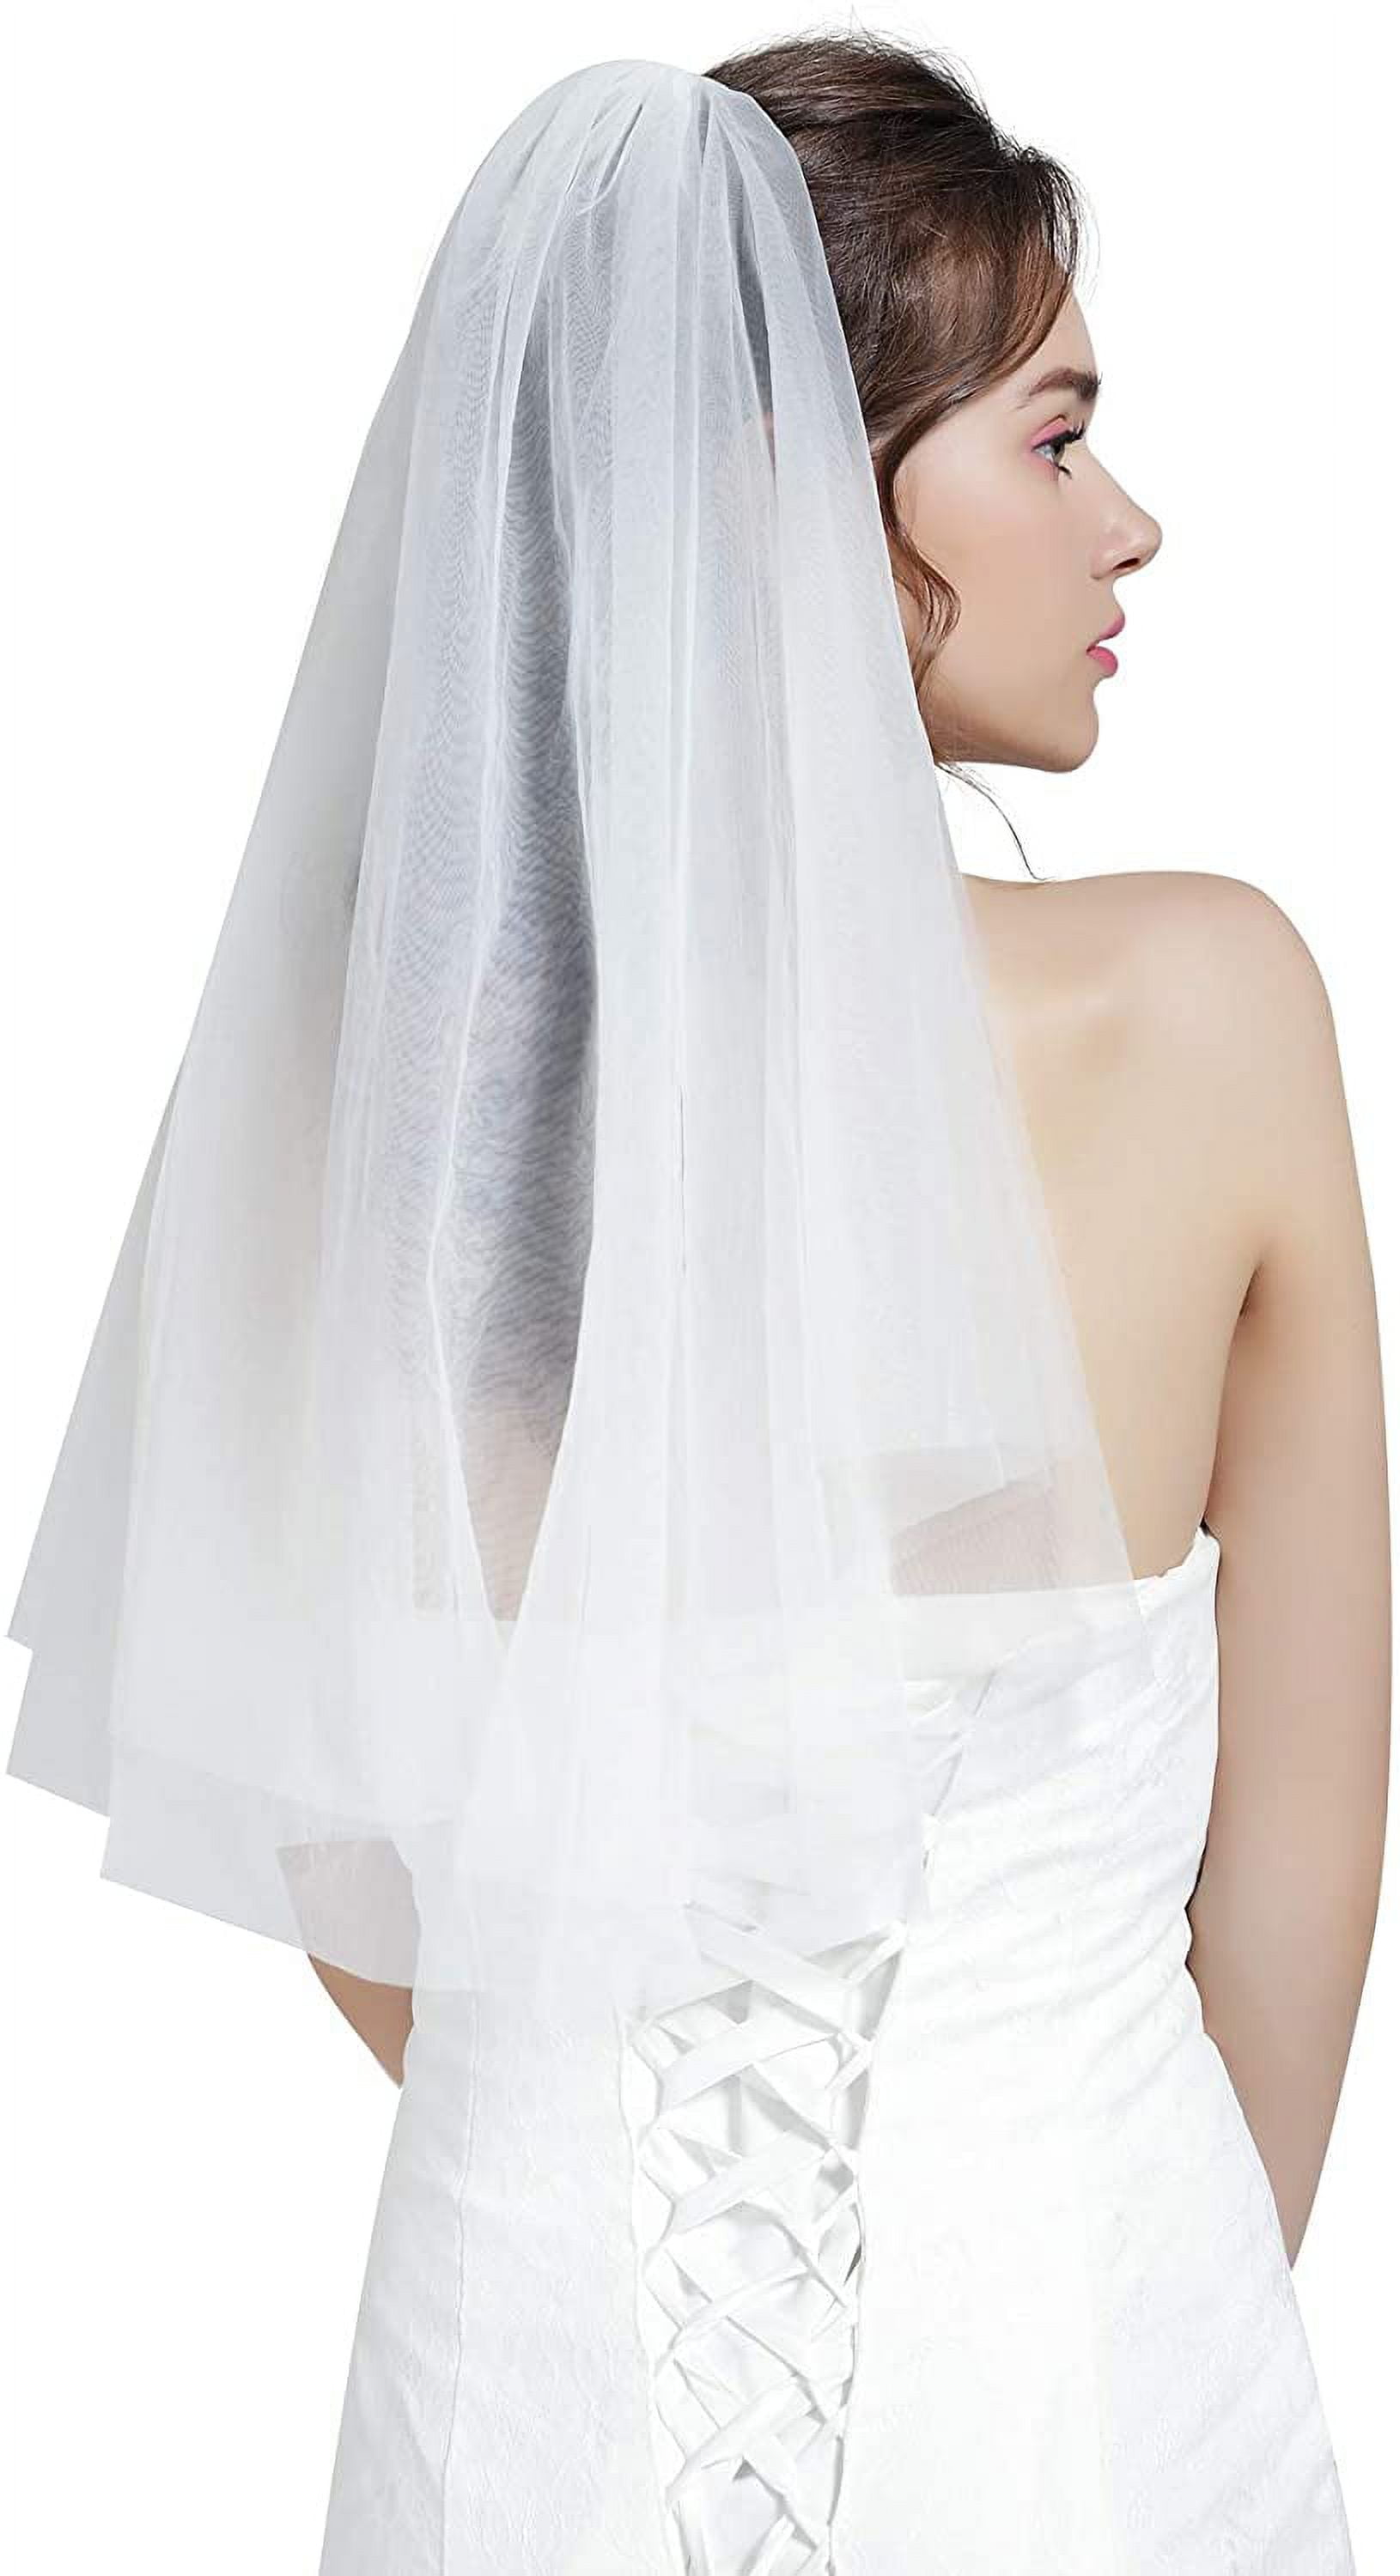 Eaytmo Simple Bride Wedding Veils Ivory Hip Length Bridal Veils 2-Tier Short Veil with Comb Soft Tulle Hair Accessories for Brides (ivory)